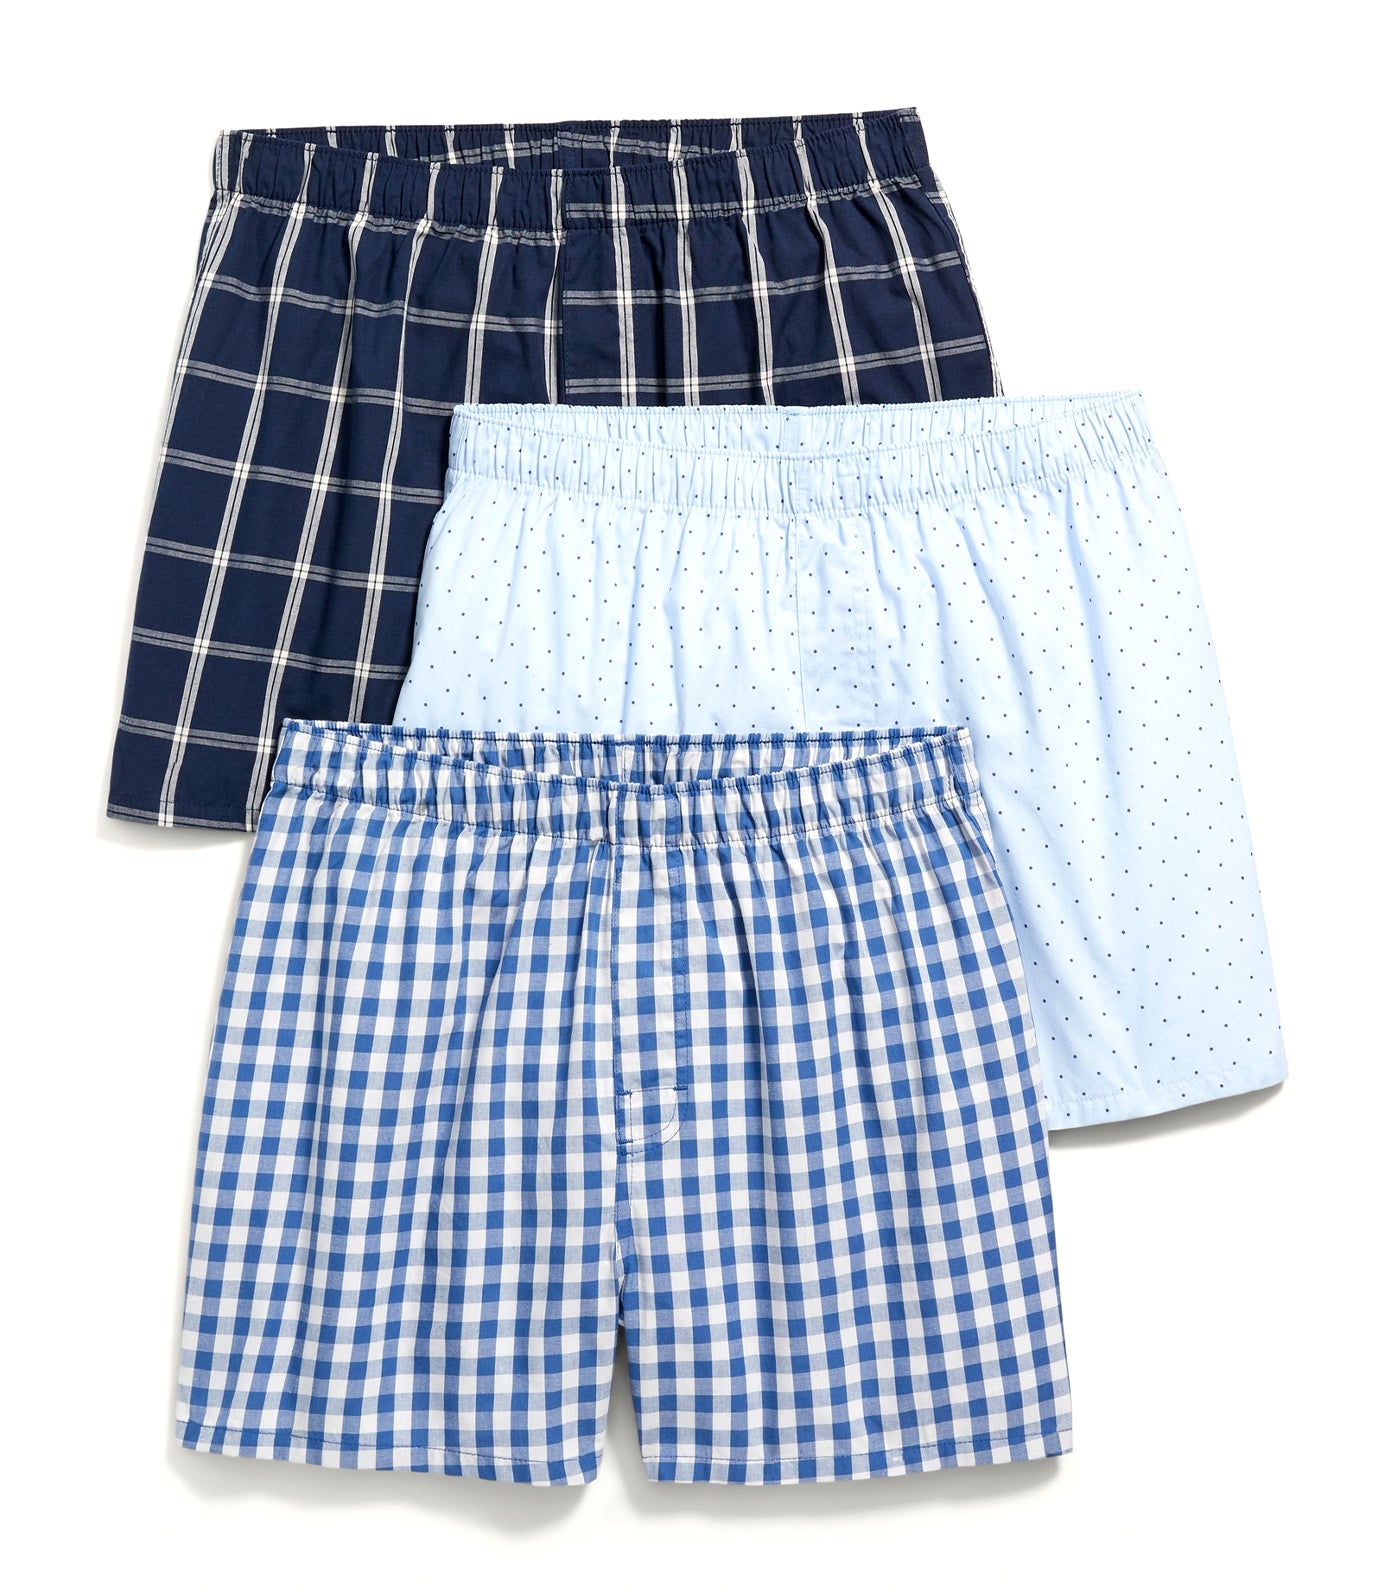 Soft-Washed Boxer Shorts 3-Pack for Men Navy Windowpane